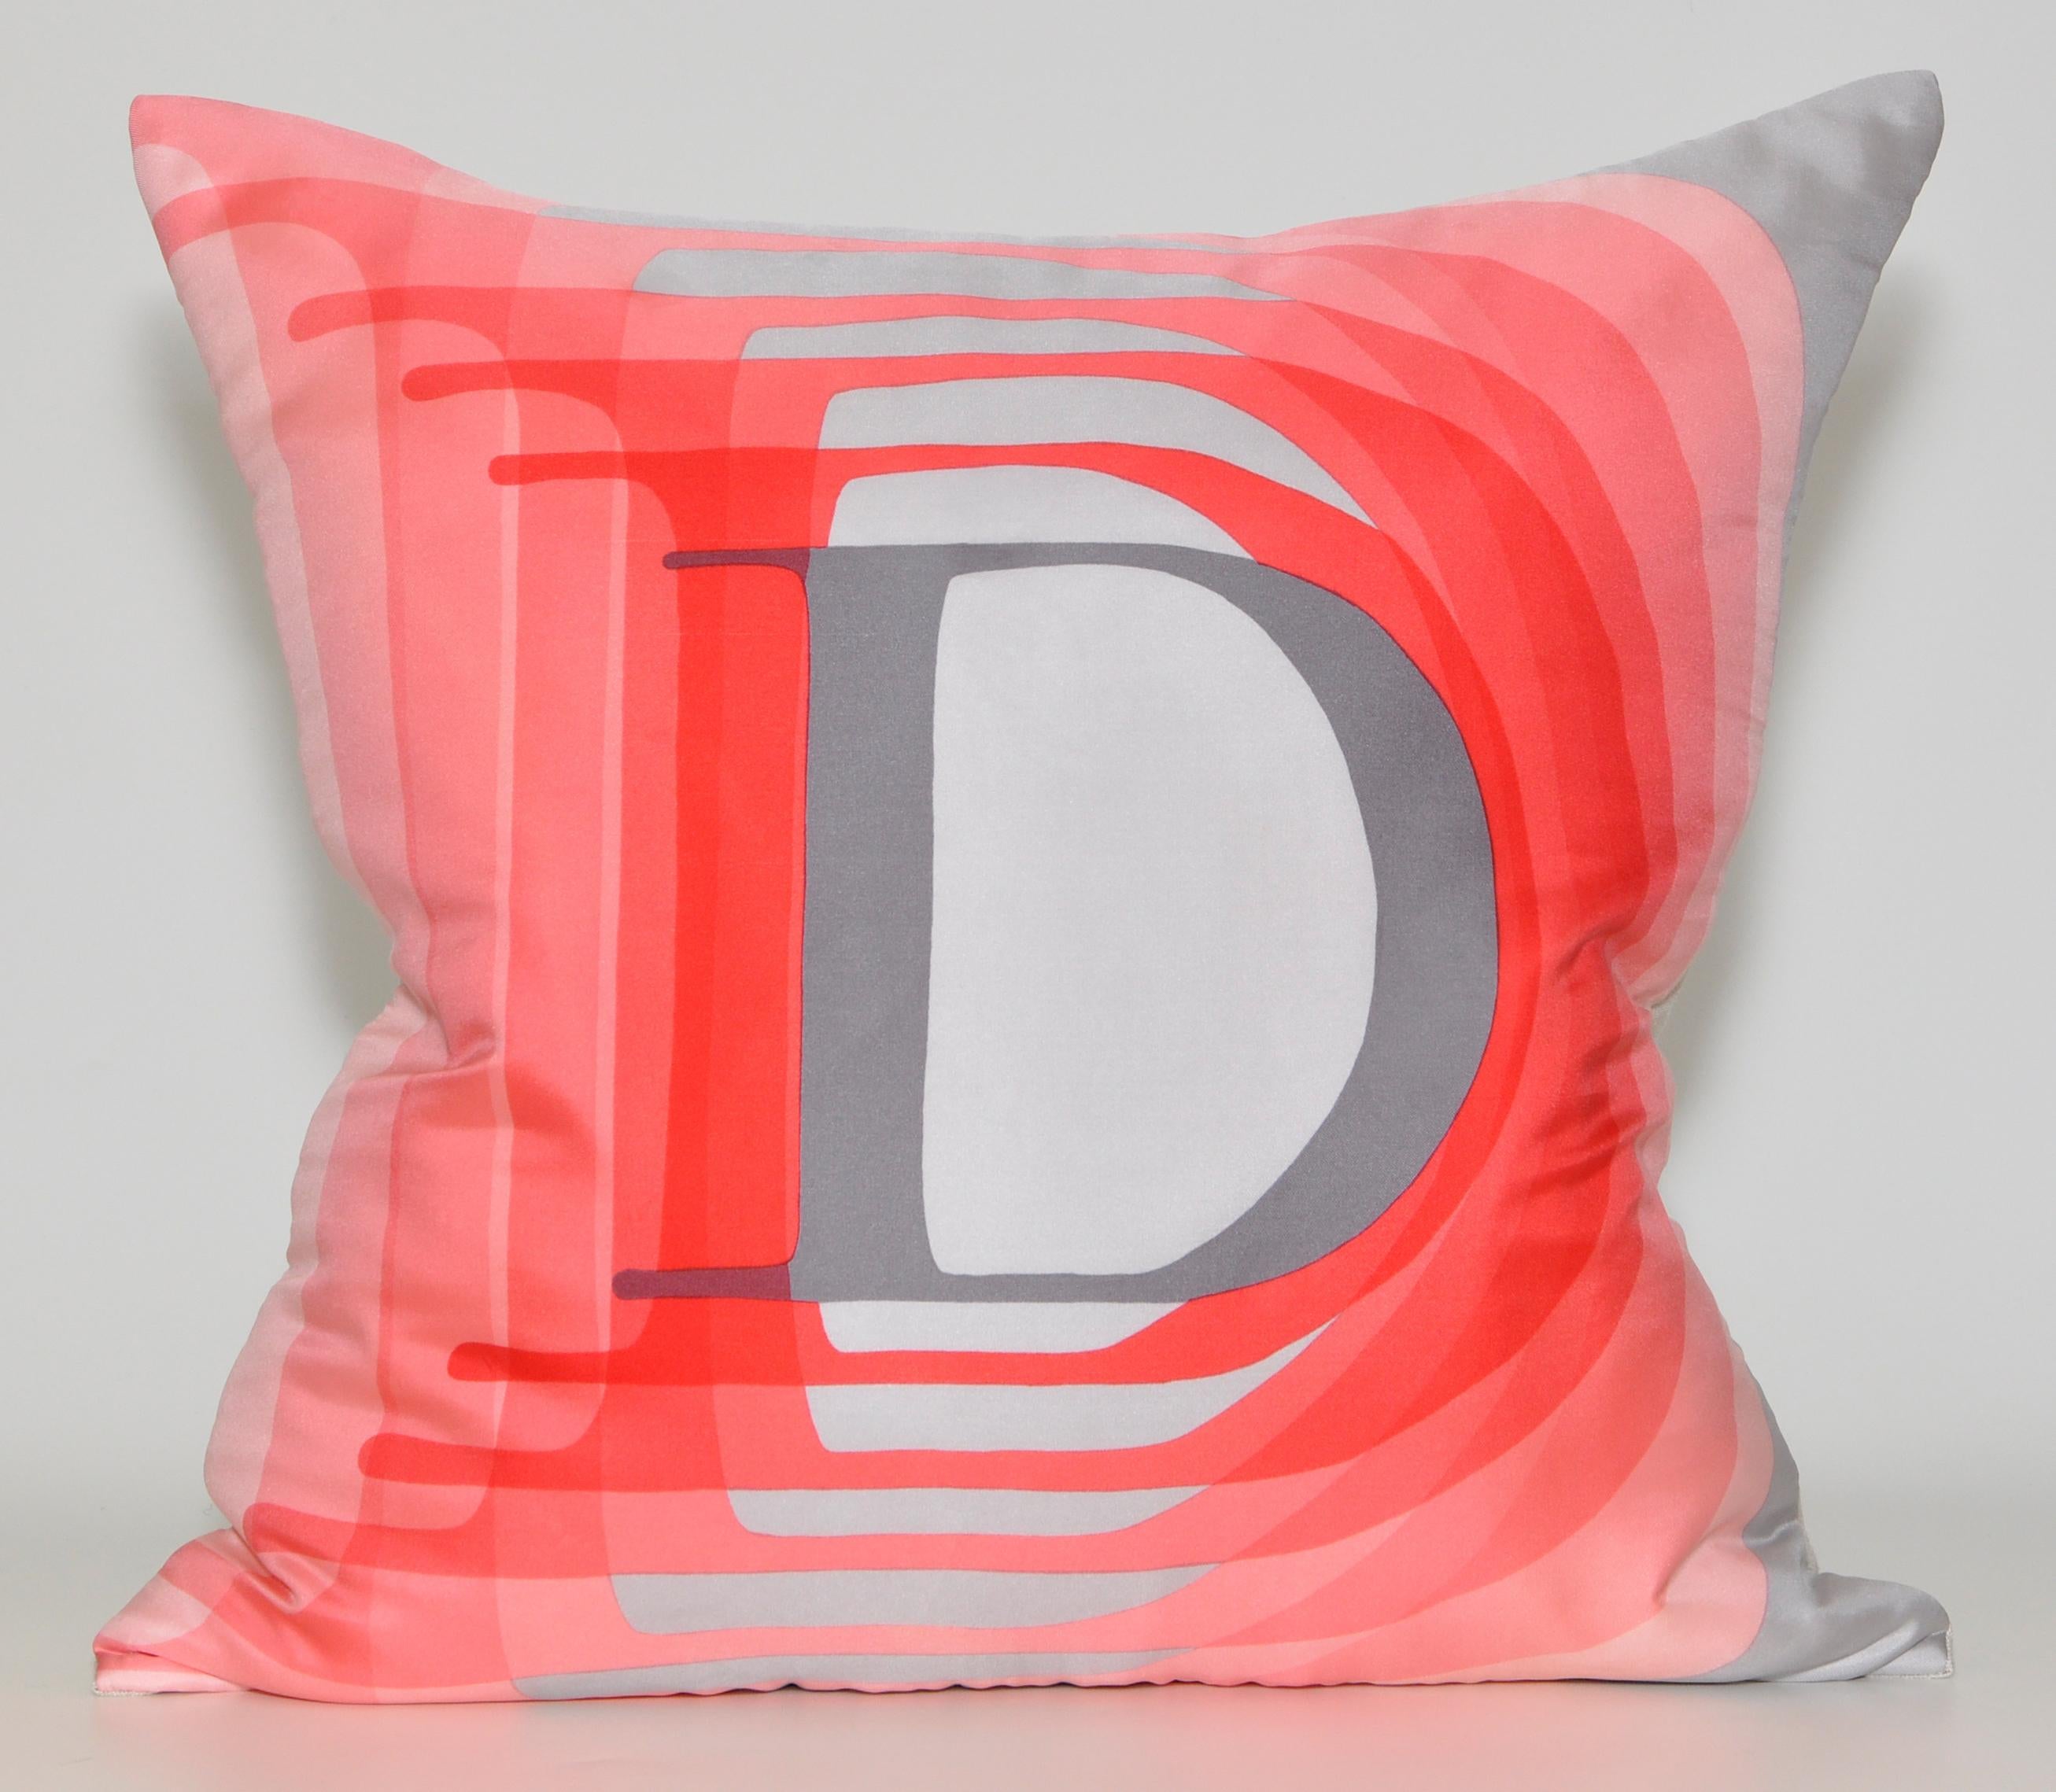 Vintage Christian Dior silk scarf with Irish linen cushion pillow red gray pink

Custom made one-of-a-kind luxury cushion created from an exquisite vintage 1980s silk Christian Dior fashion scarf in an exquisitely colored design. The prominent and